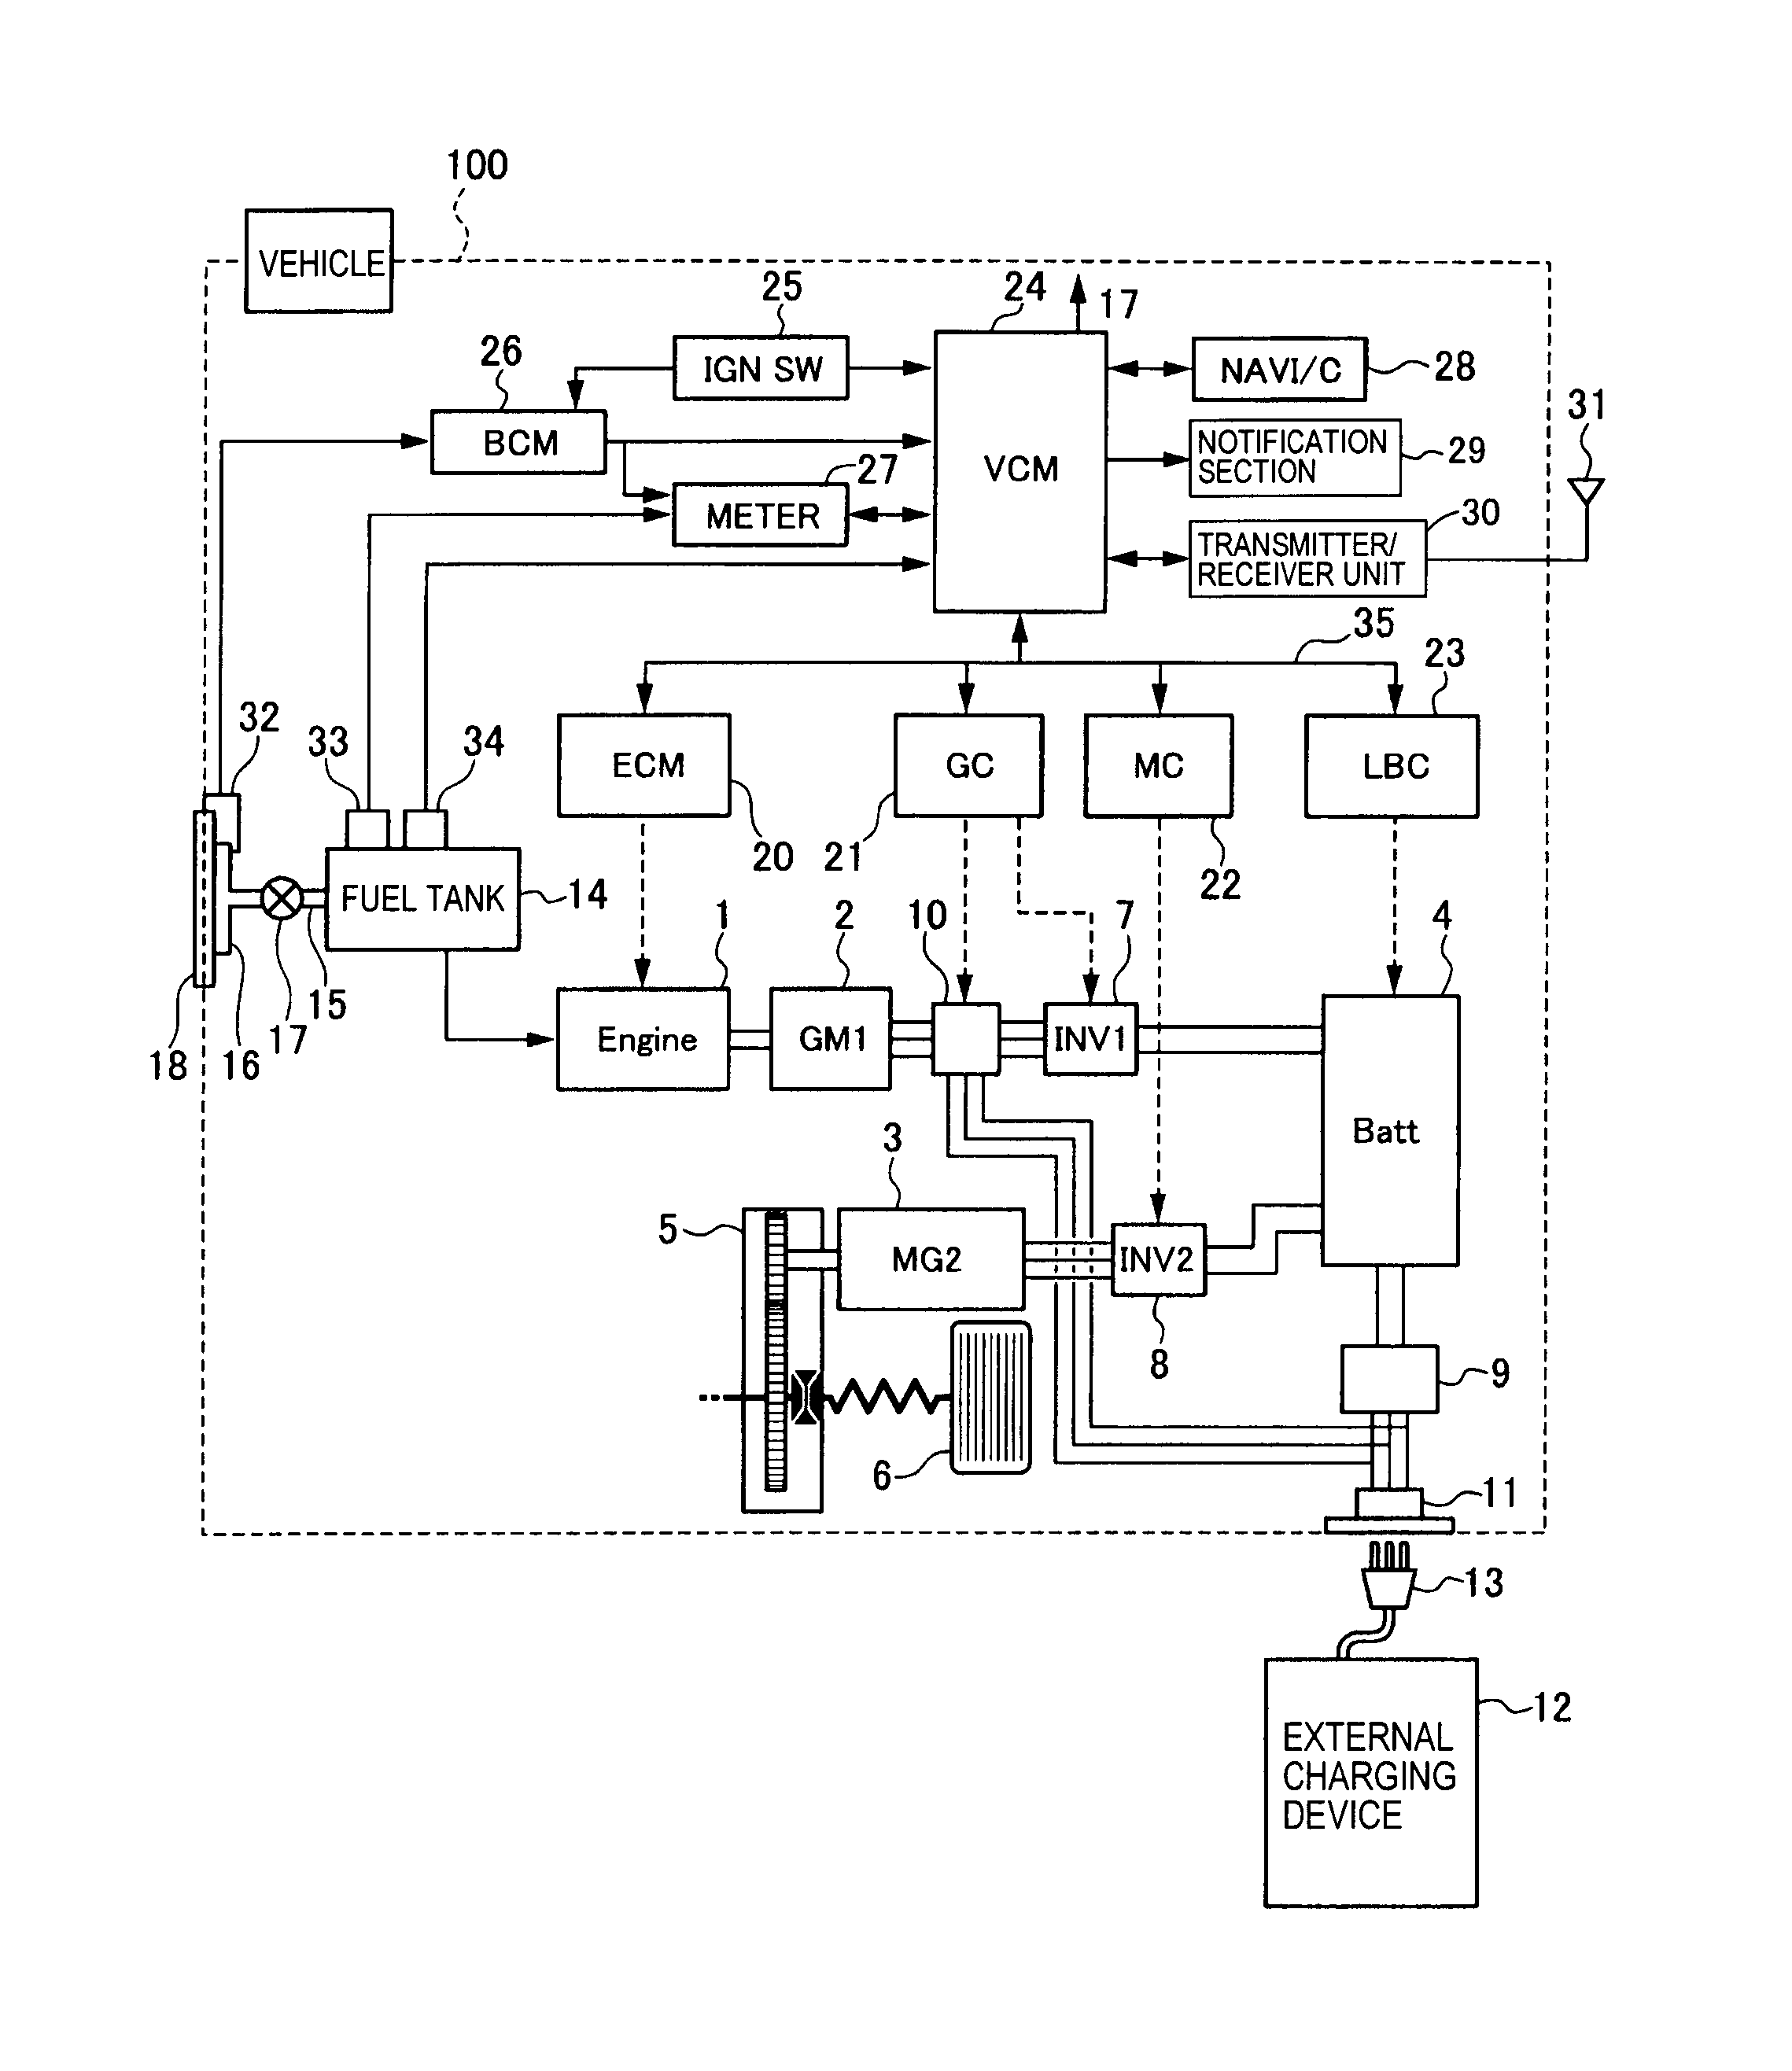 trace dr 3624 internal wiring diagram